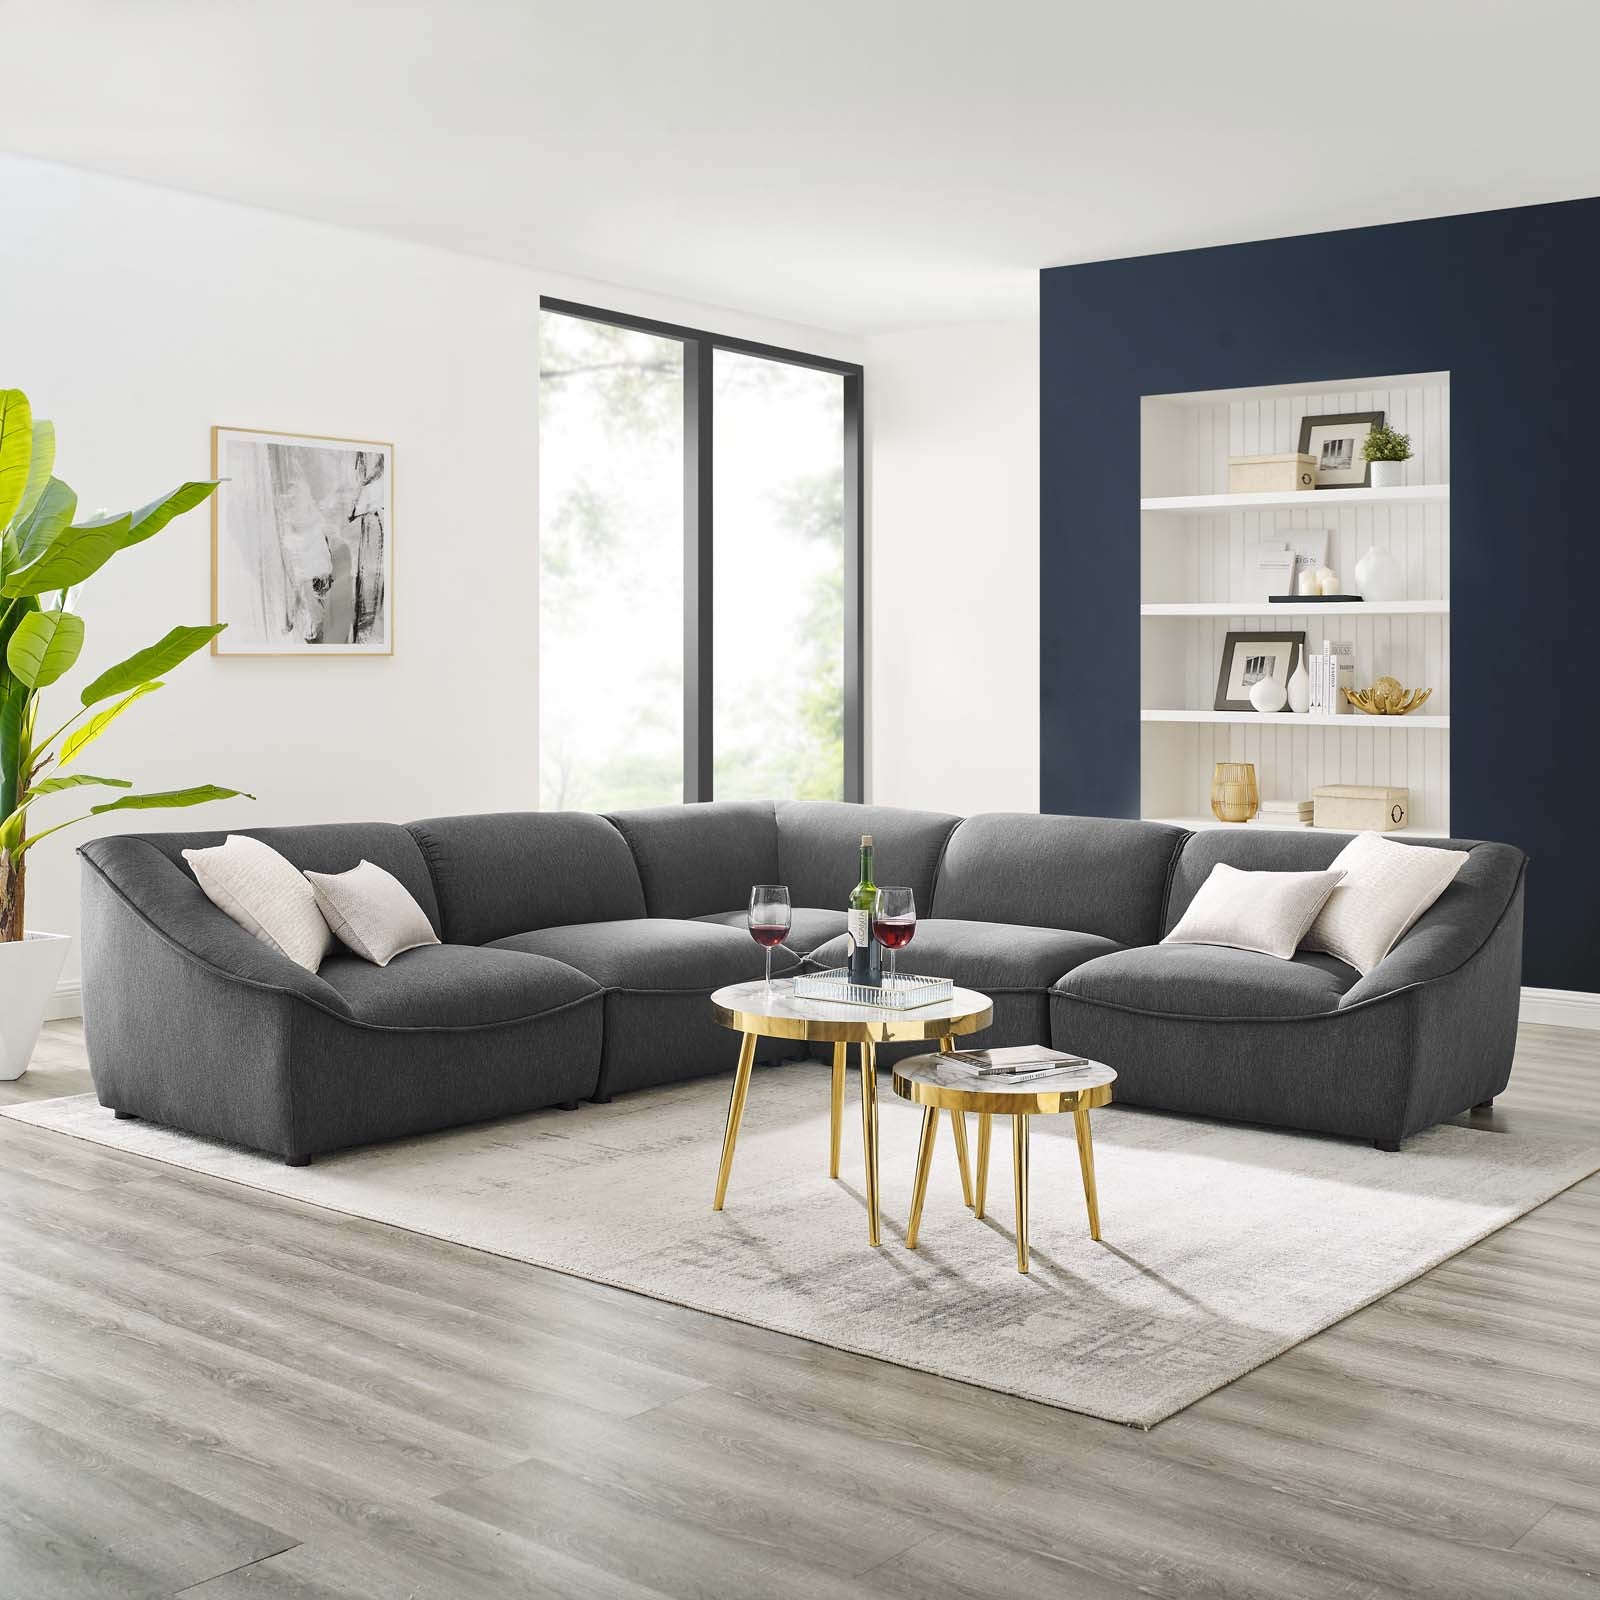 Comprise 5 Piece Sectional Sofa